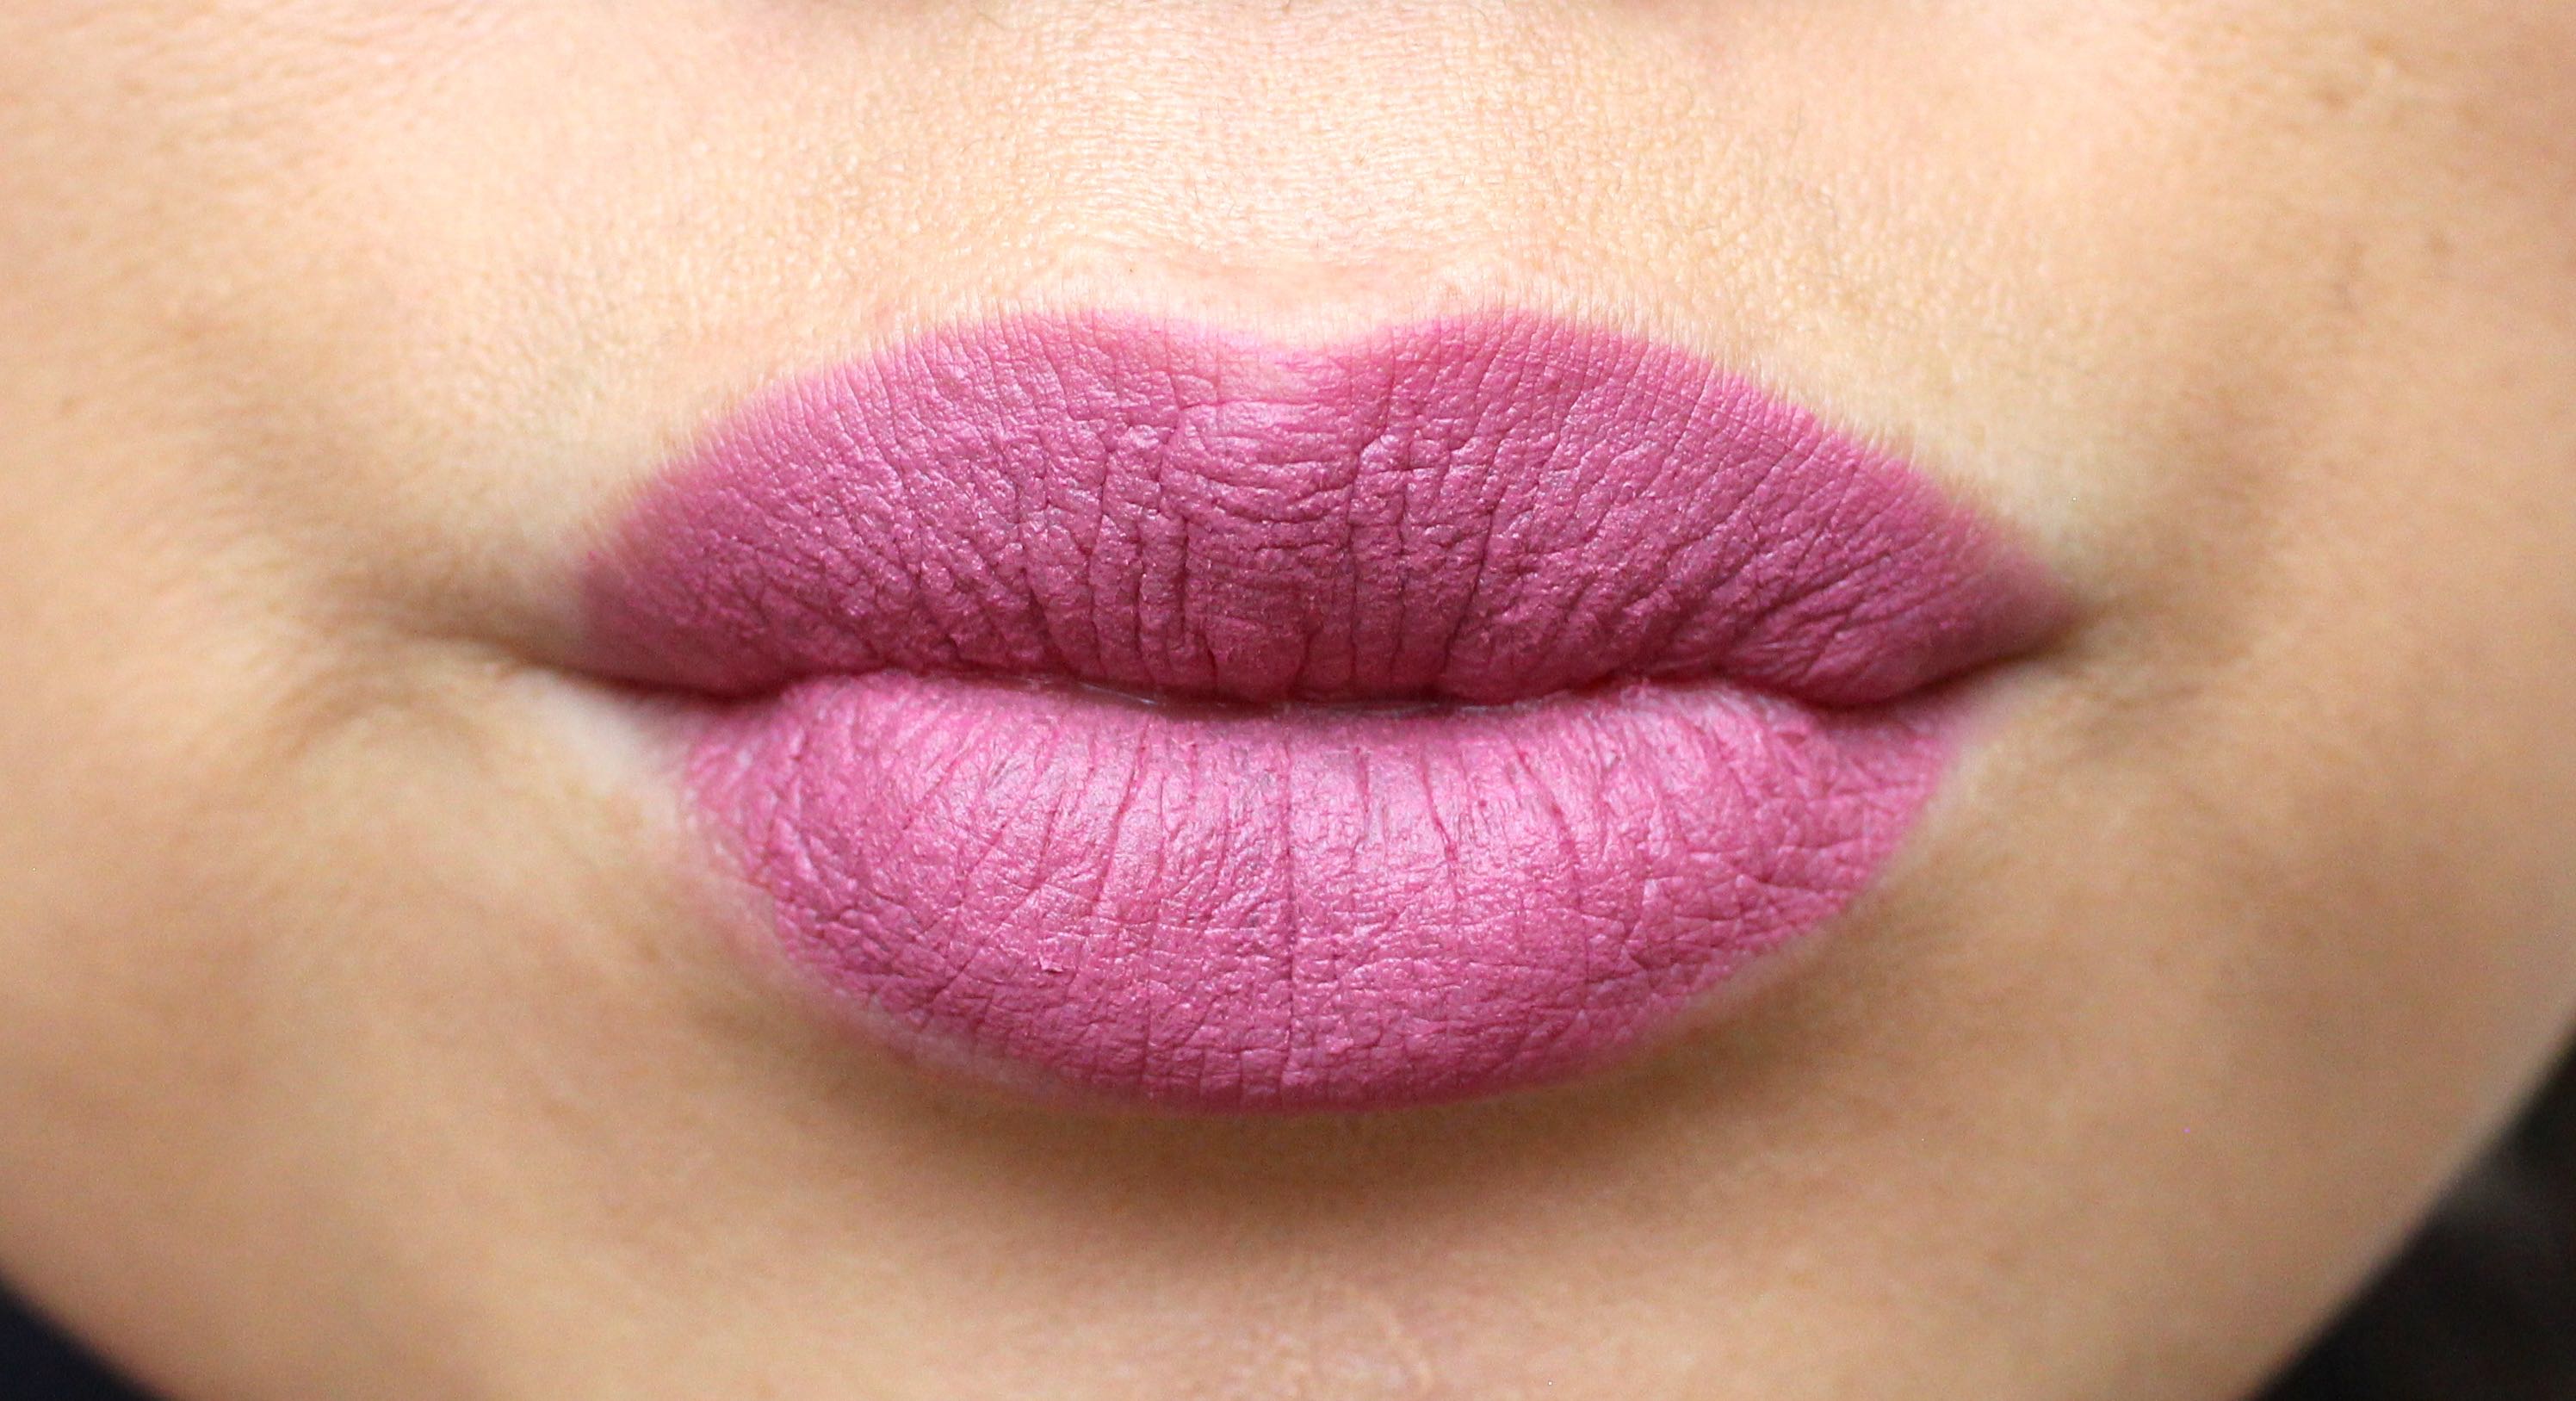 Maybelline Colour Sensational Creamy Matte Lipstick in Lust for Blush review by facemadeup.com